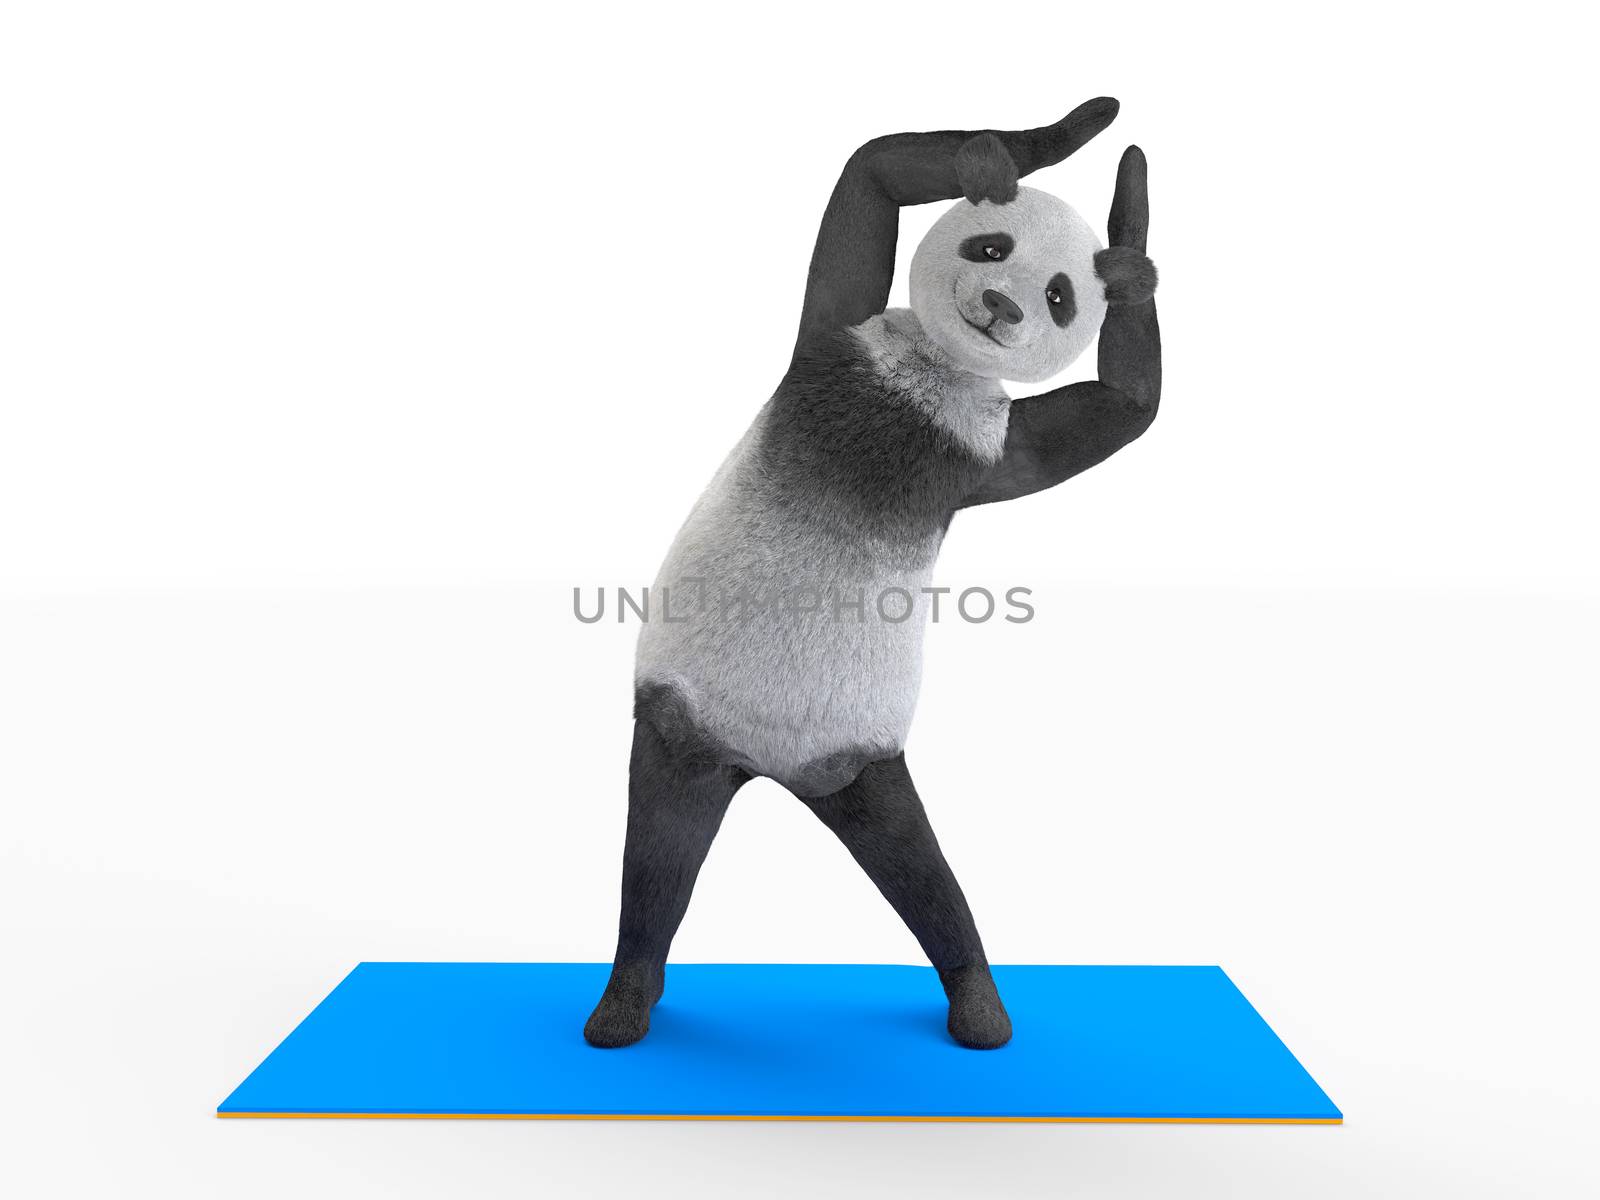 side bends with arms raised. Panda makes workout. Stretching oblique abdominal muscles.